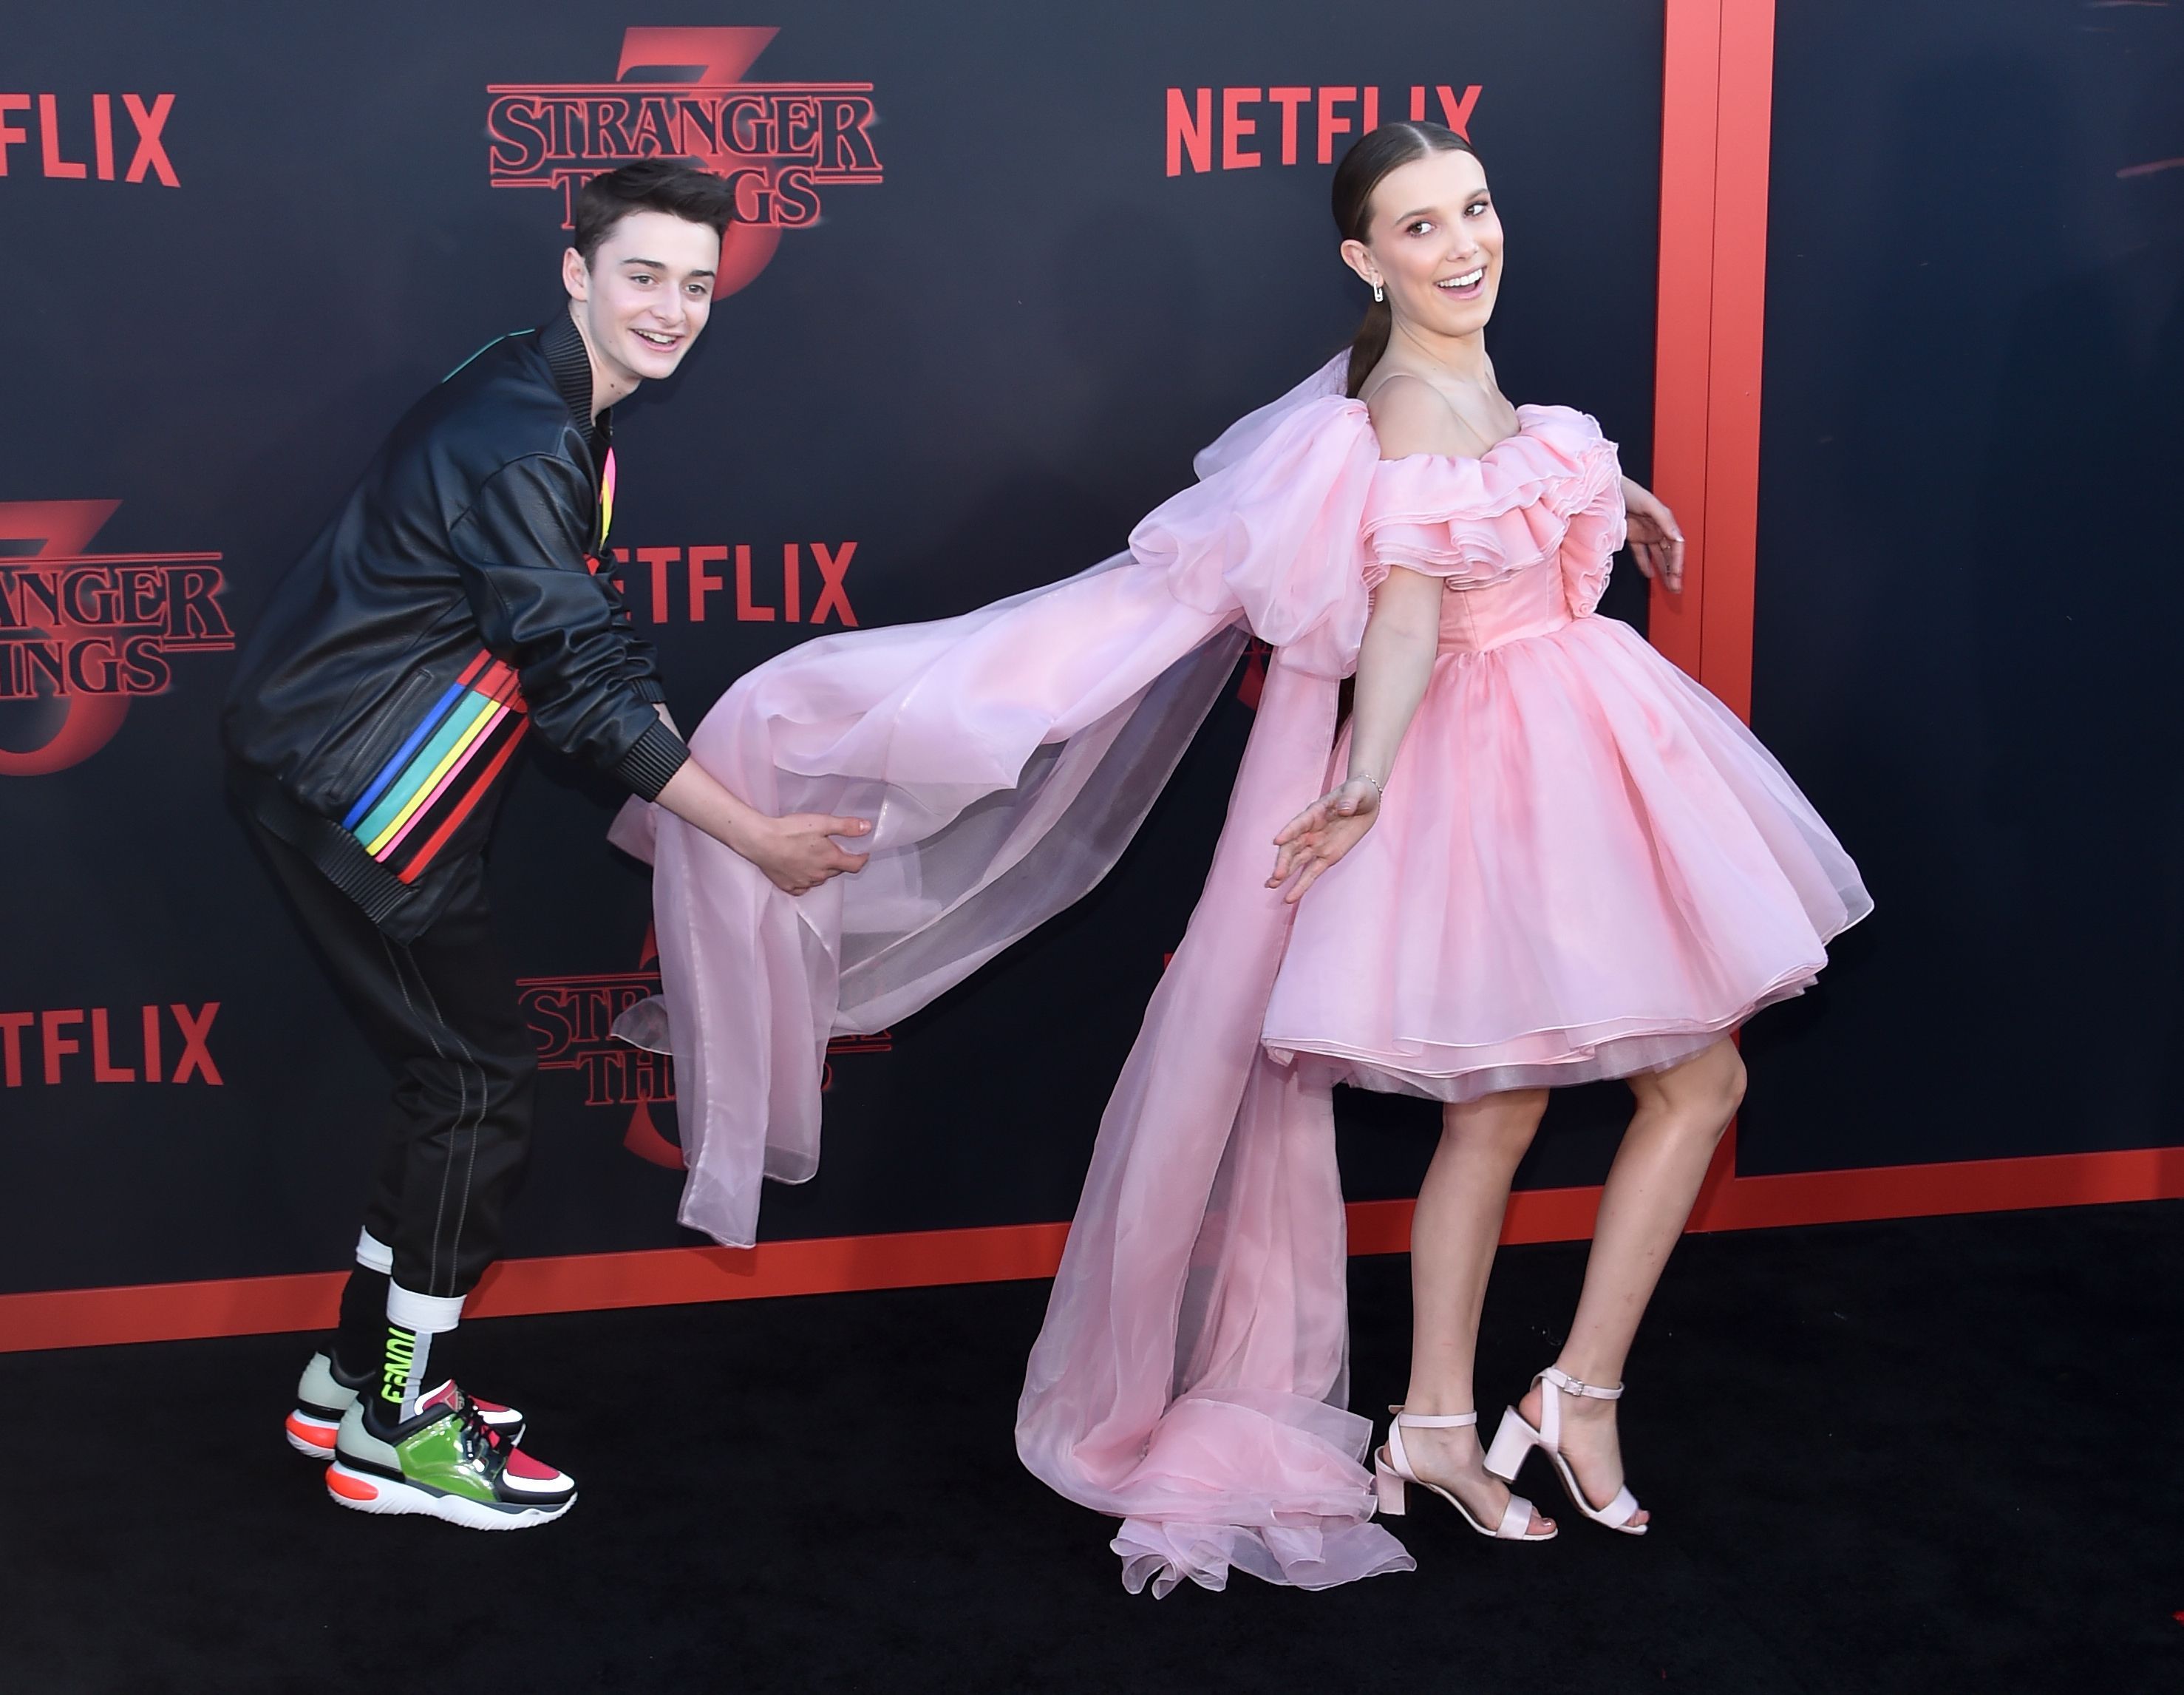 Millie Bobby Brown At 'Stranger Things 3' Premiere: Wears